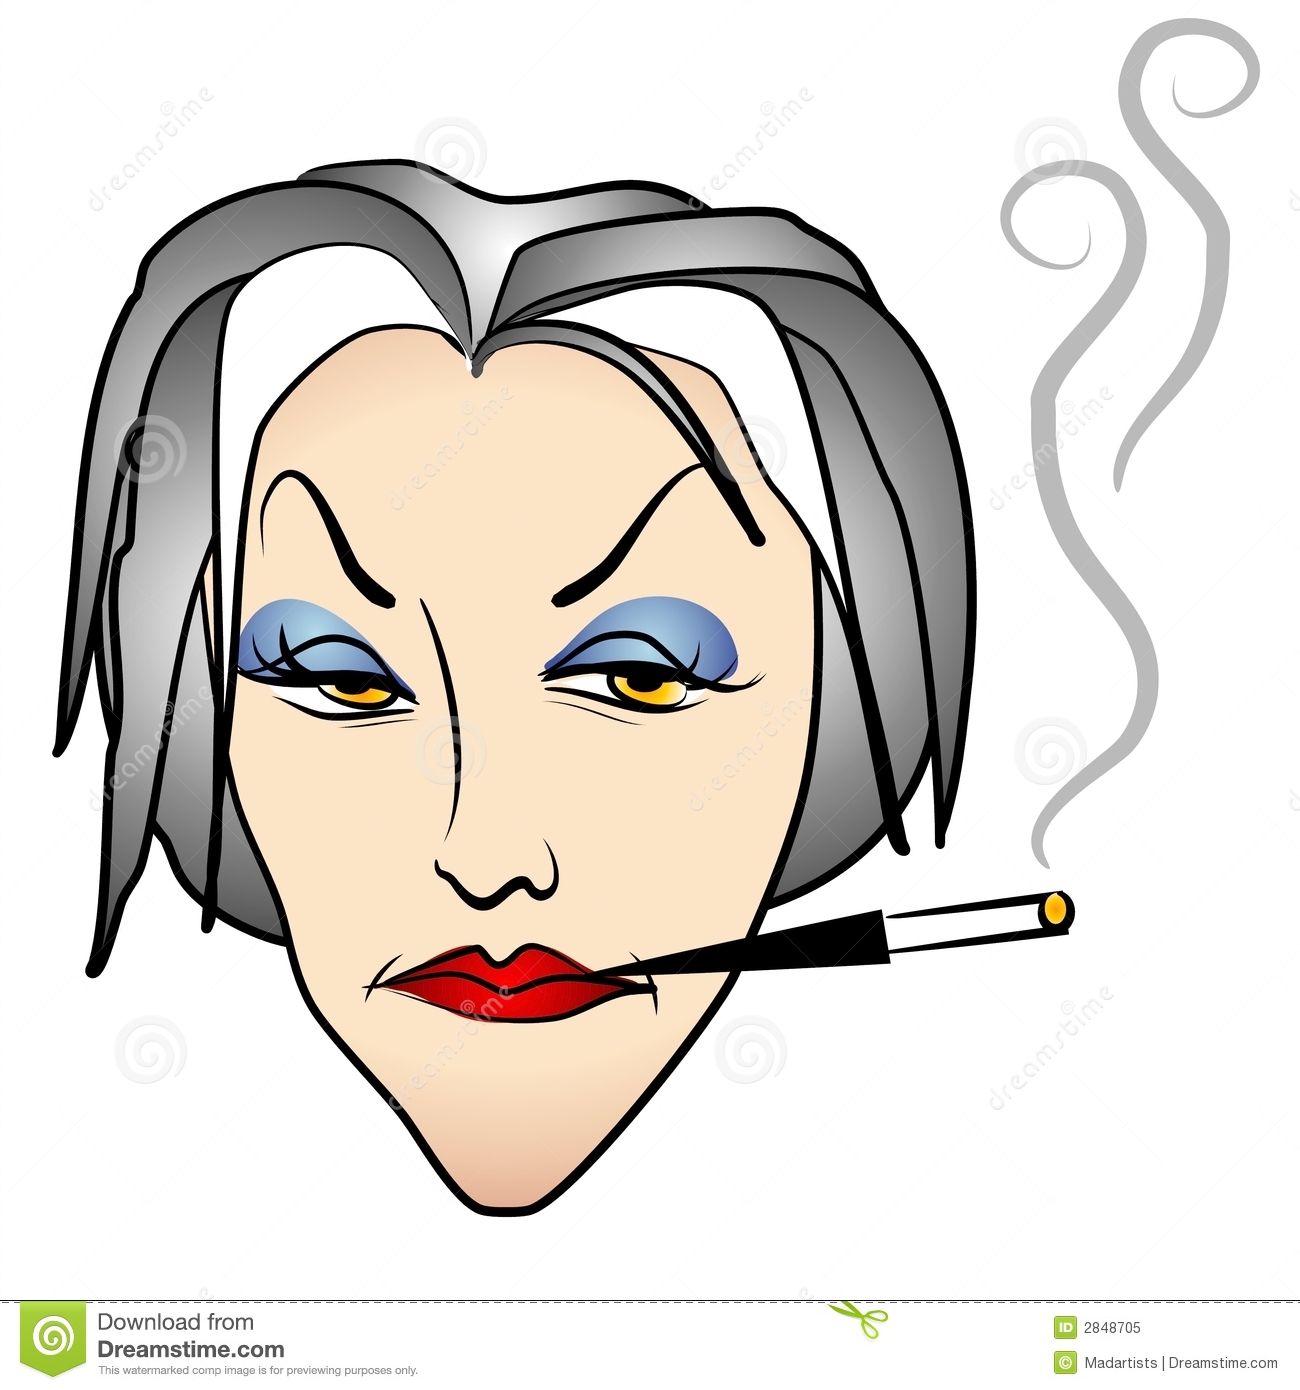 Ugly Evil Old Woman Smoking Royalty Free Stock Photo   Image  2848705